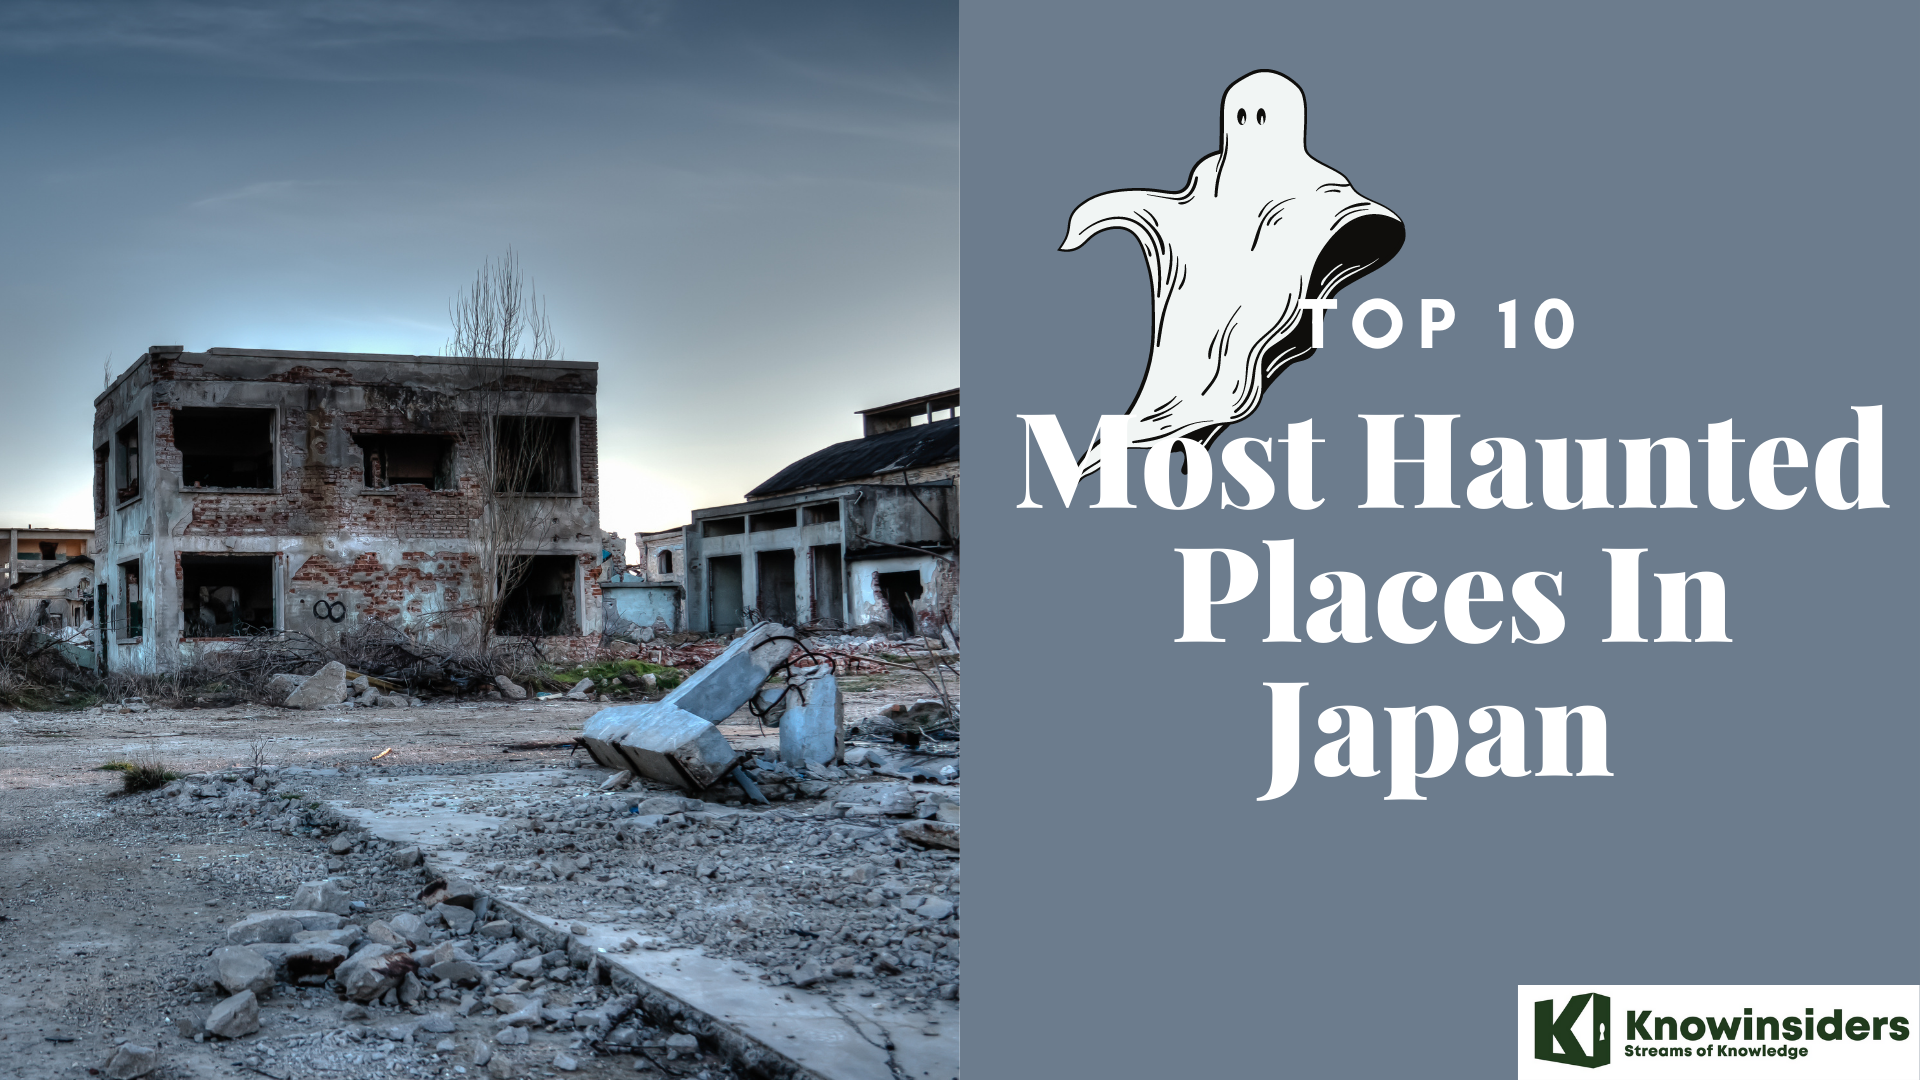 Top 10 Most Haunted Places in Japan